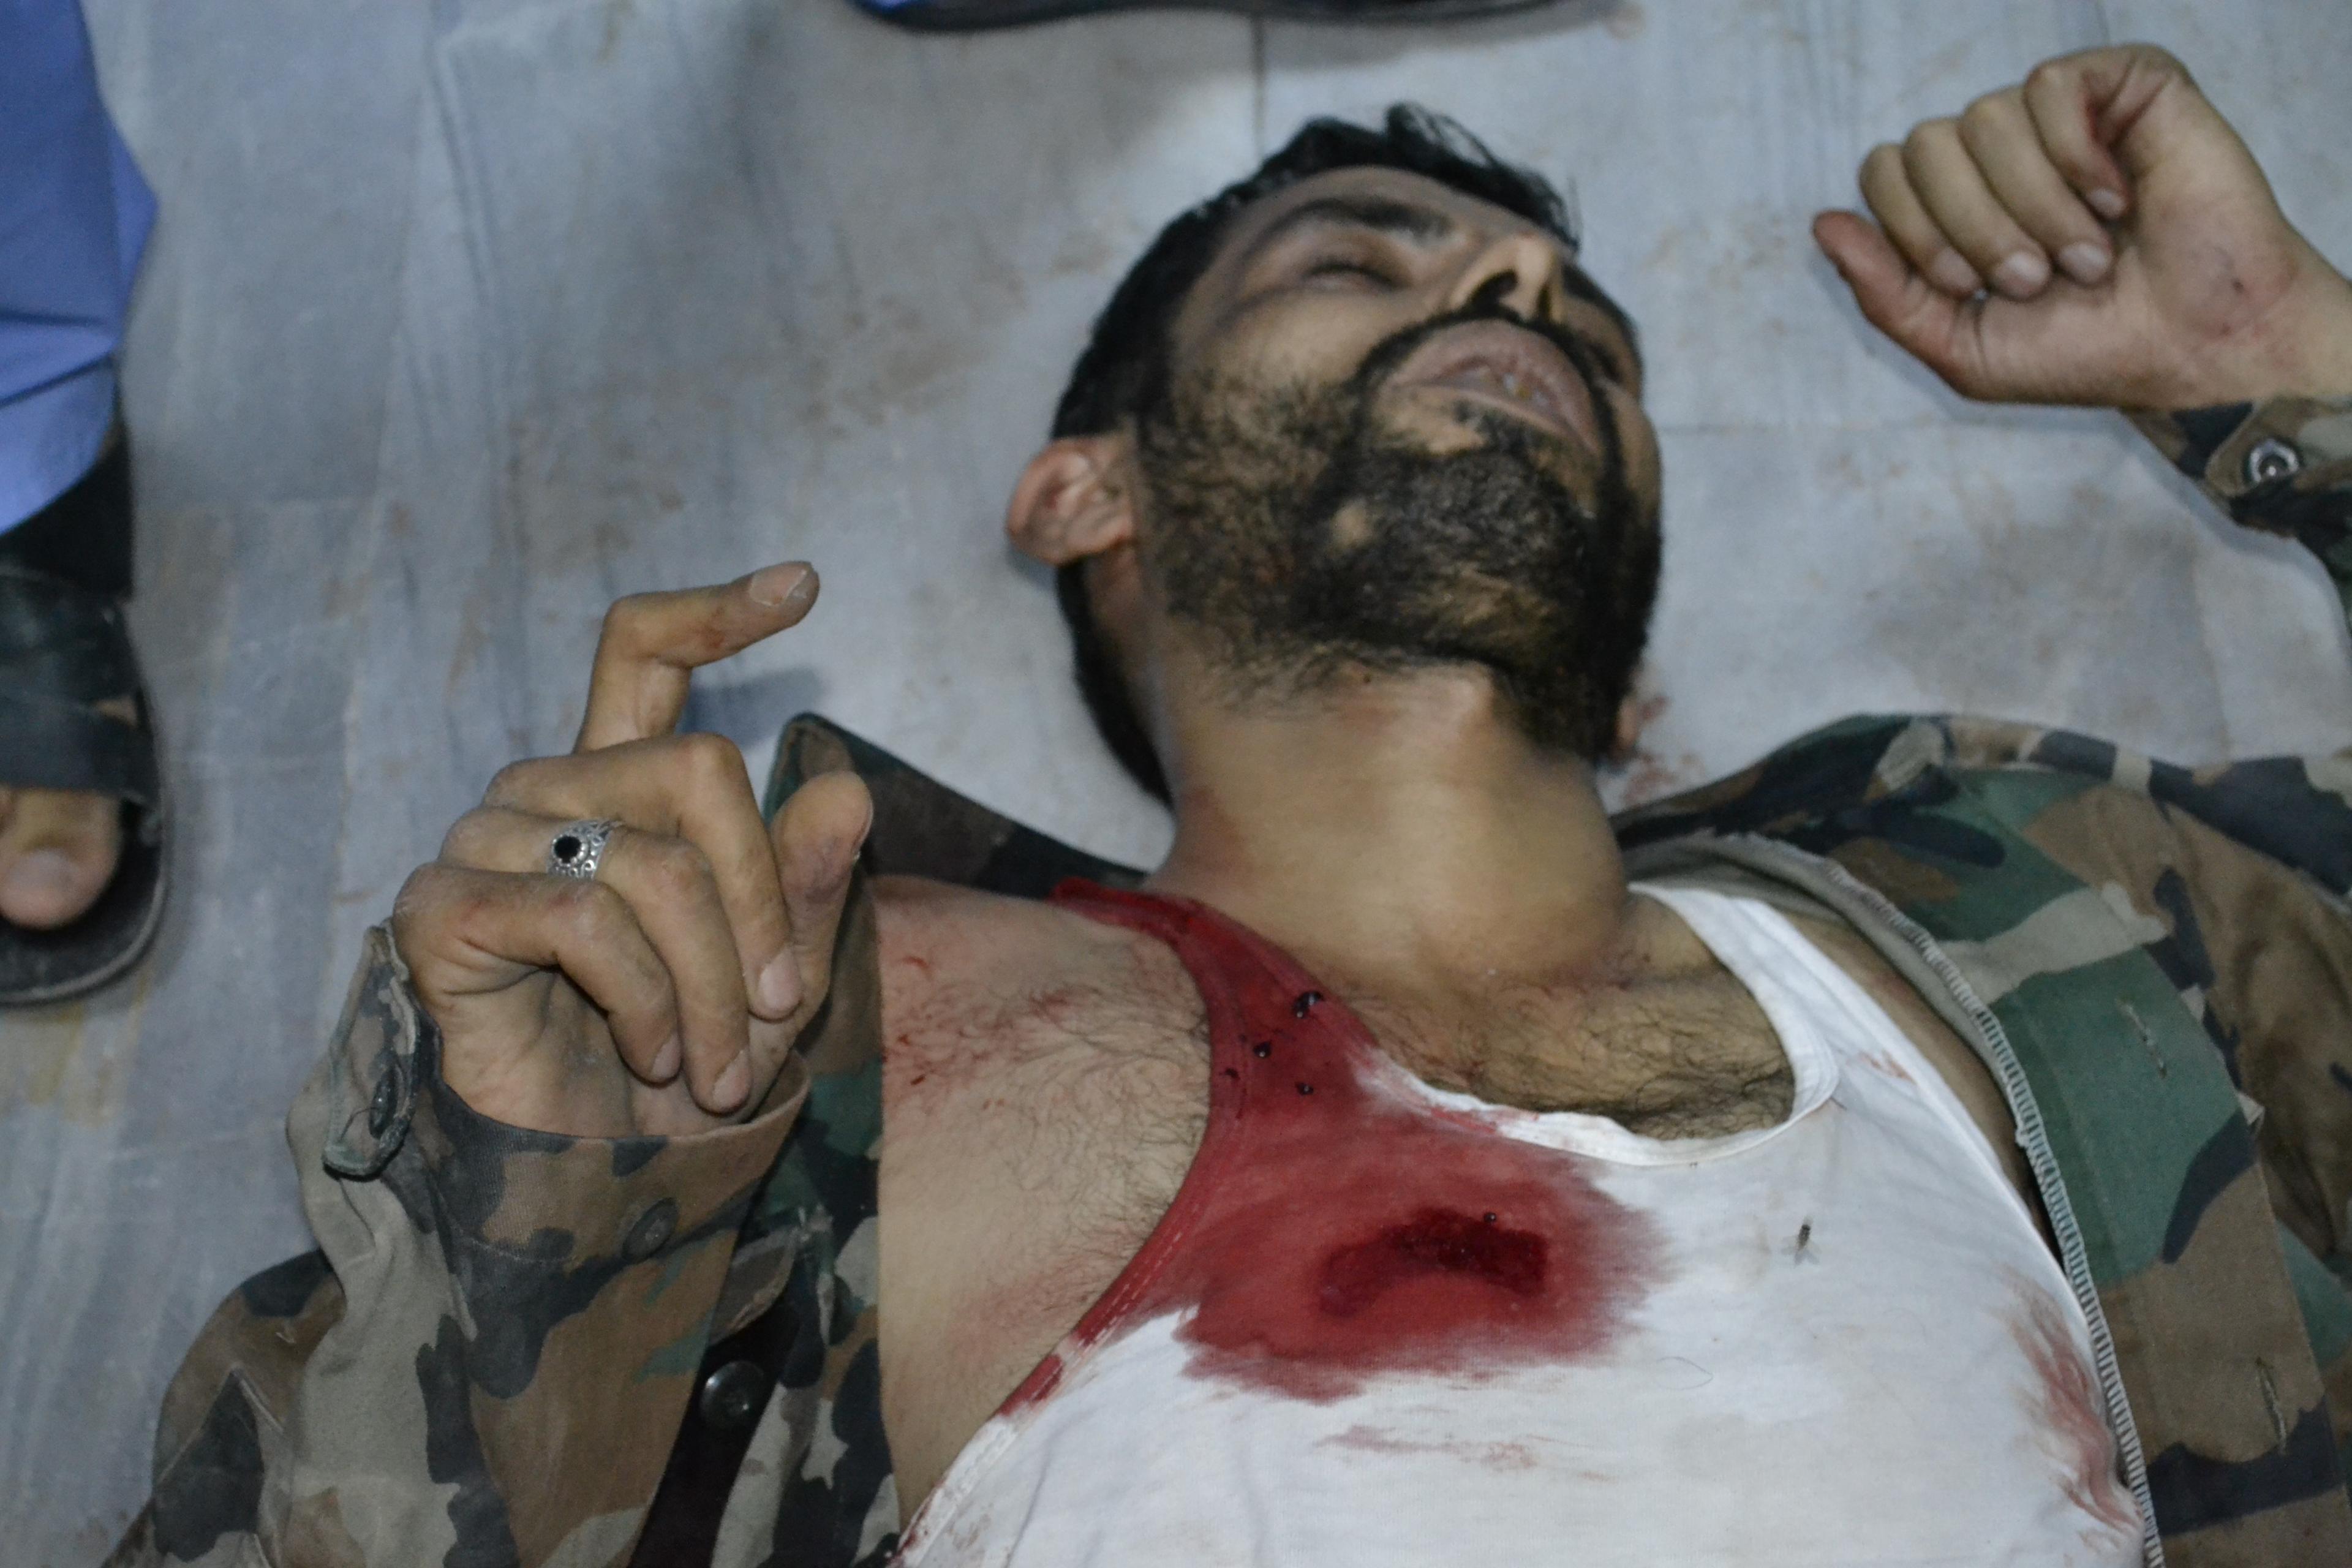 A free Syrian army fighter saying the "shahada" after being attacked on the frontline.